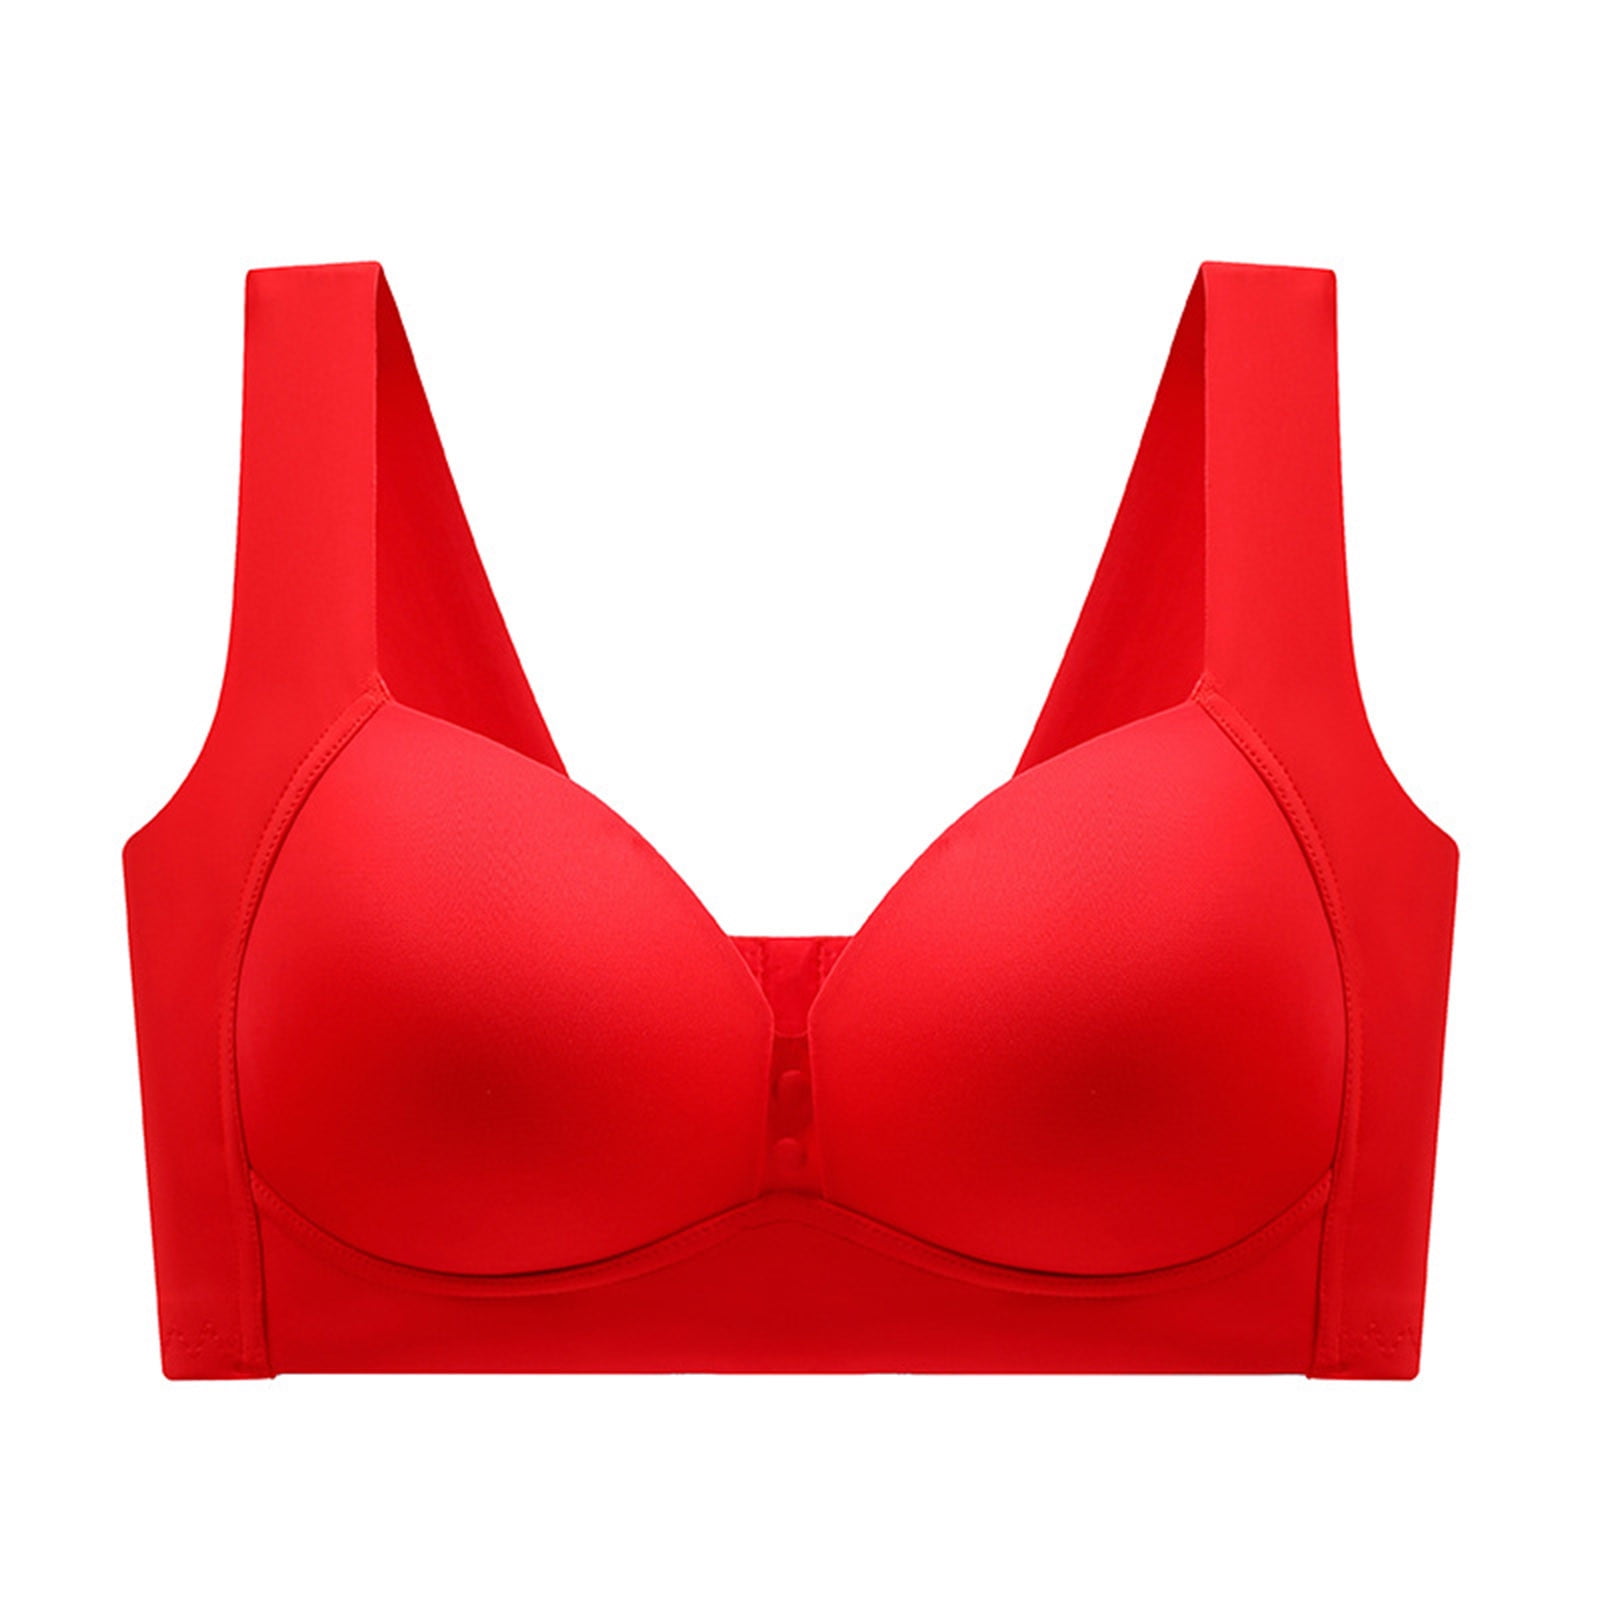 Lastesso Wireless Support Bras for Women Full Coverage and Lift No